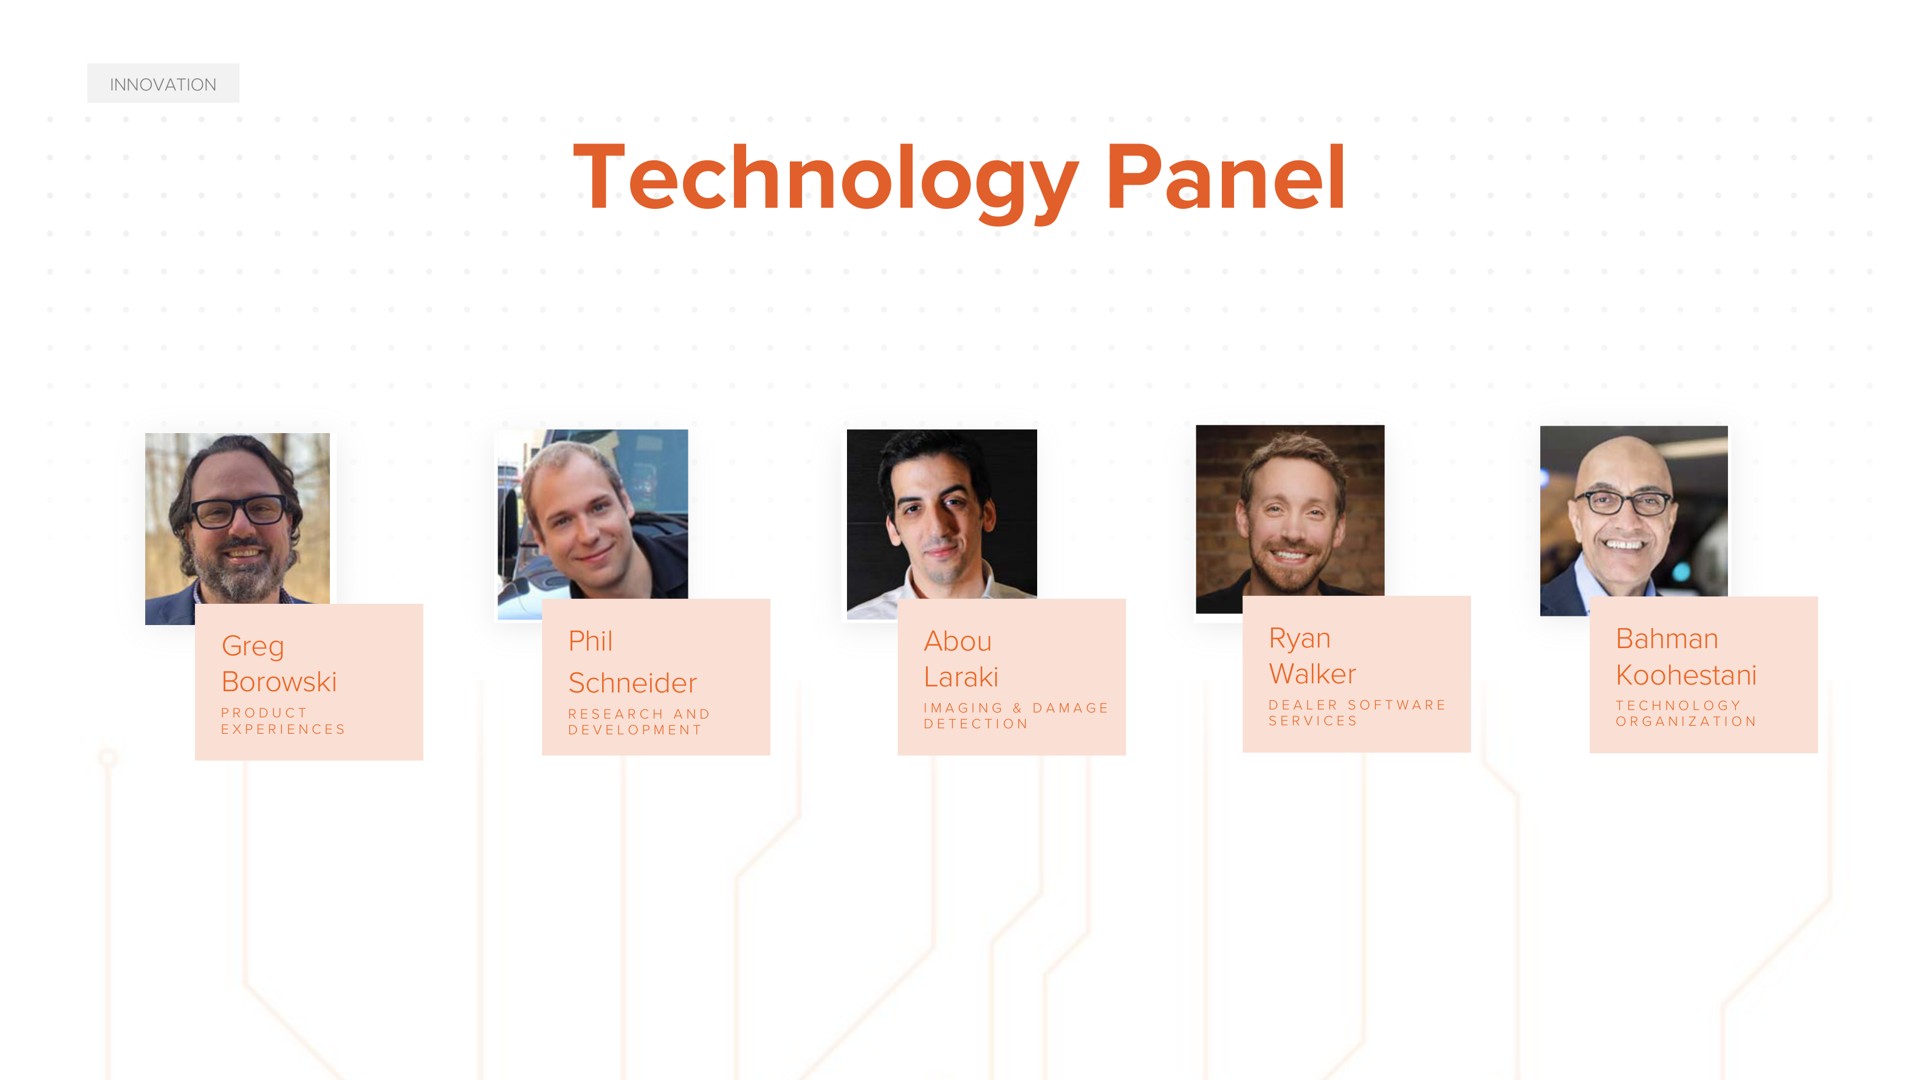 technology panel as schneider research and walker services organization | ACV Auctions